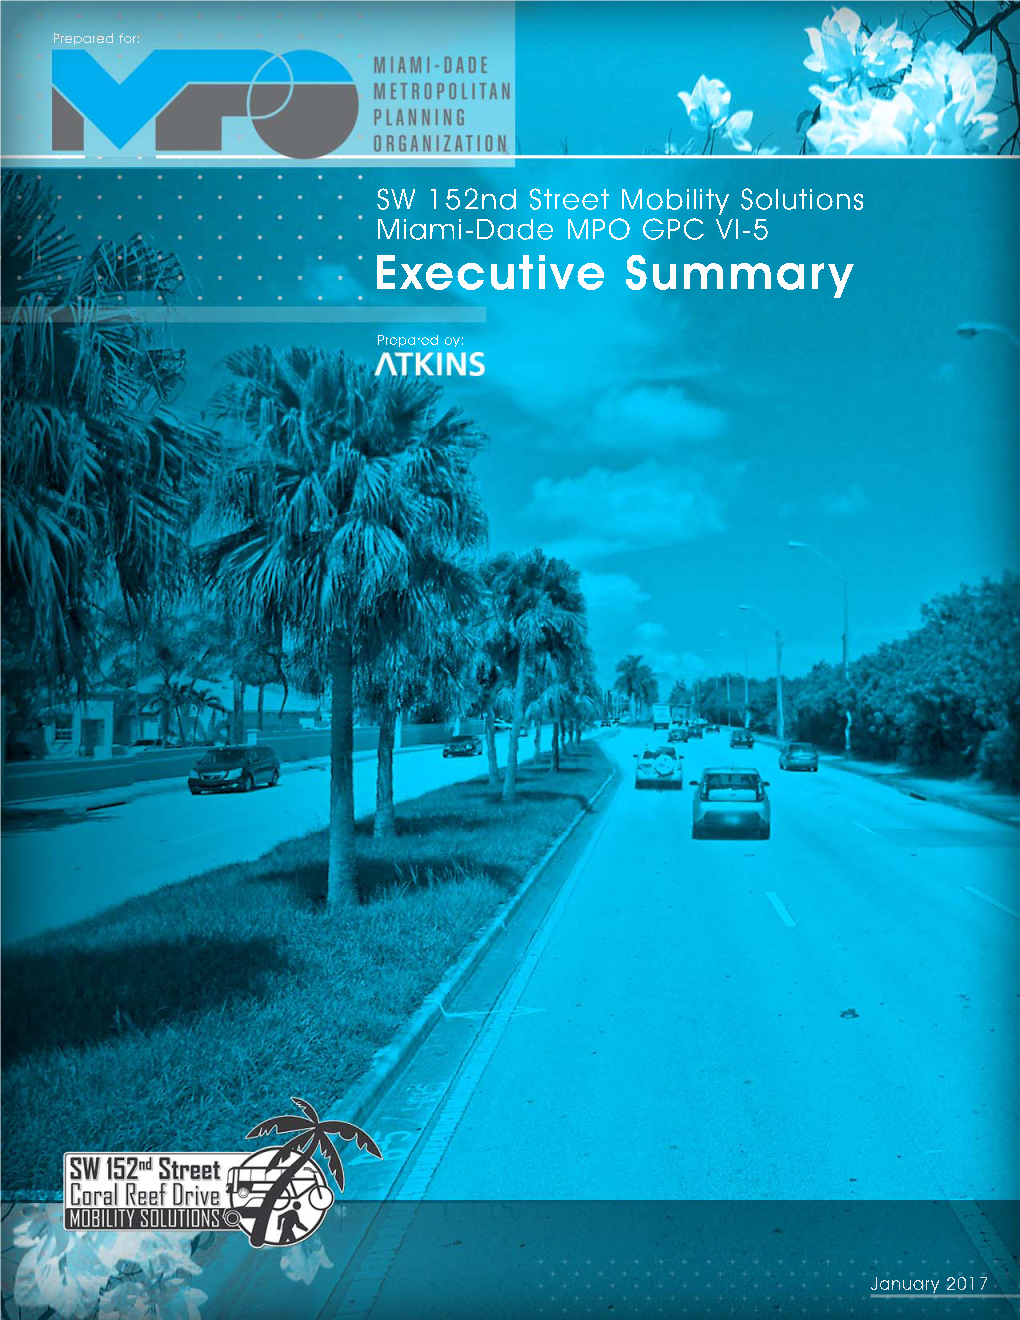 SW 152Nd Street Mobility Solutions Executive Summary, January 2017